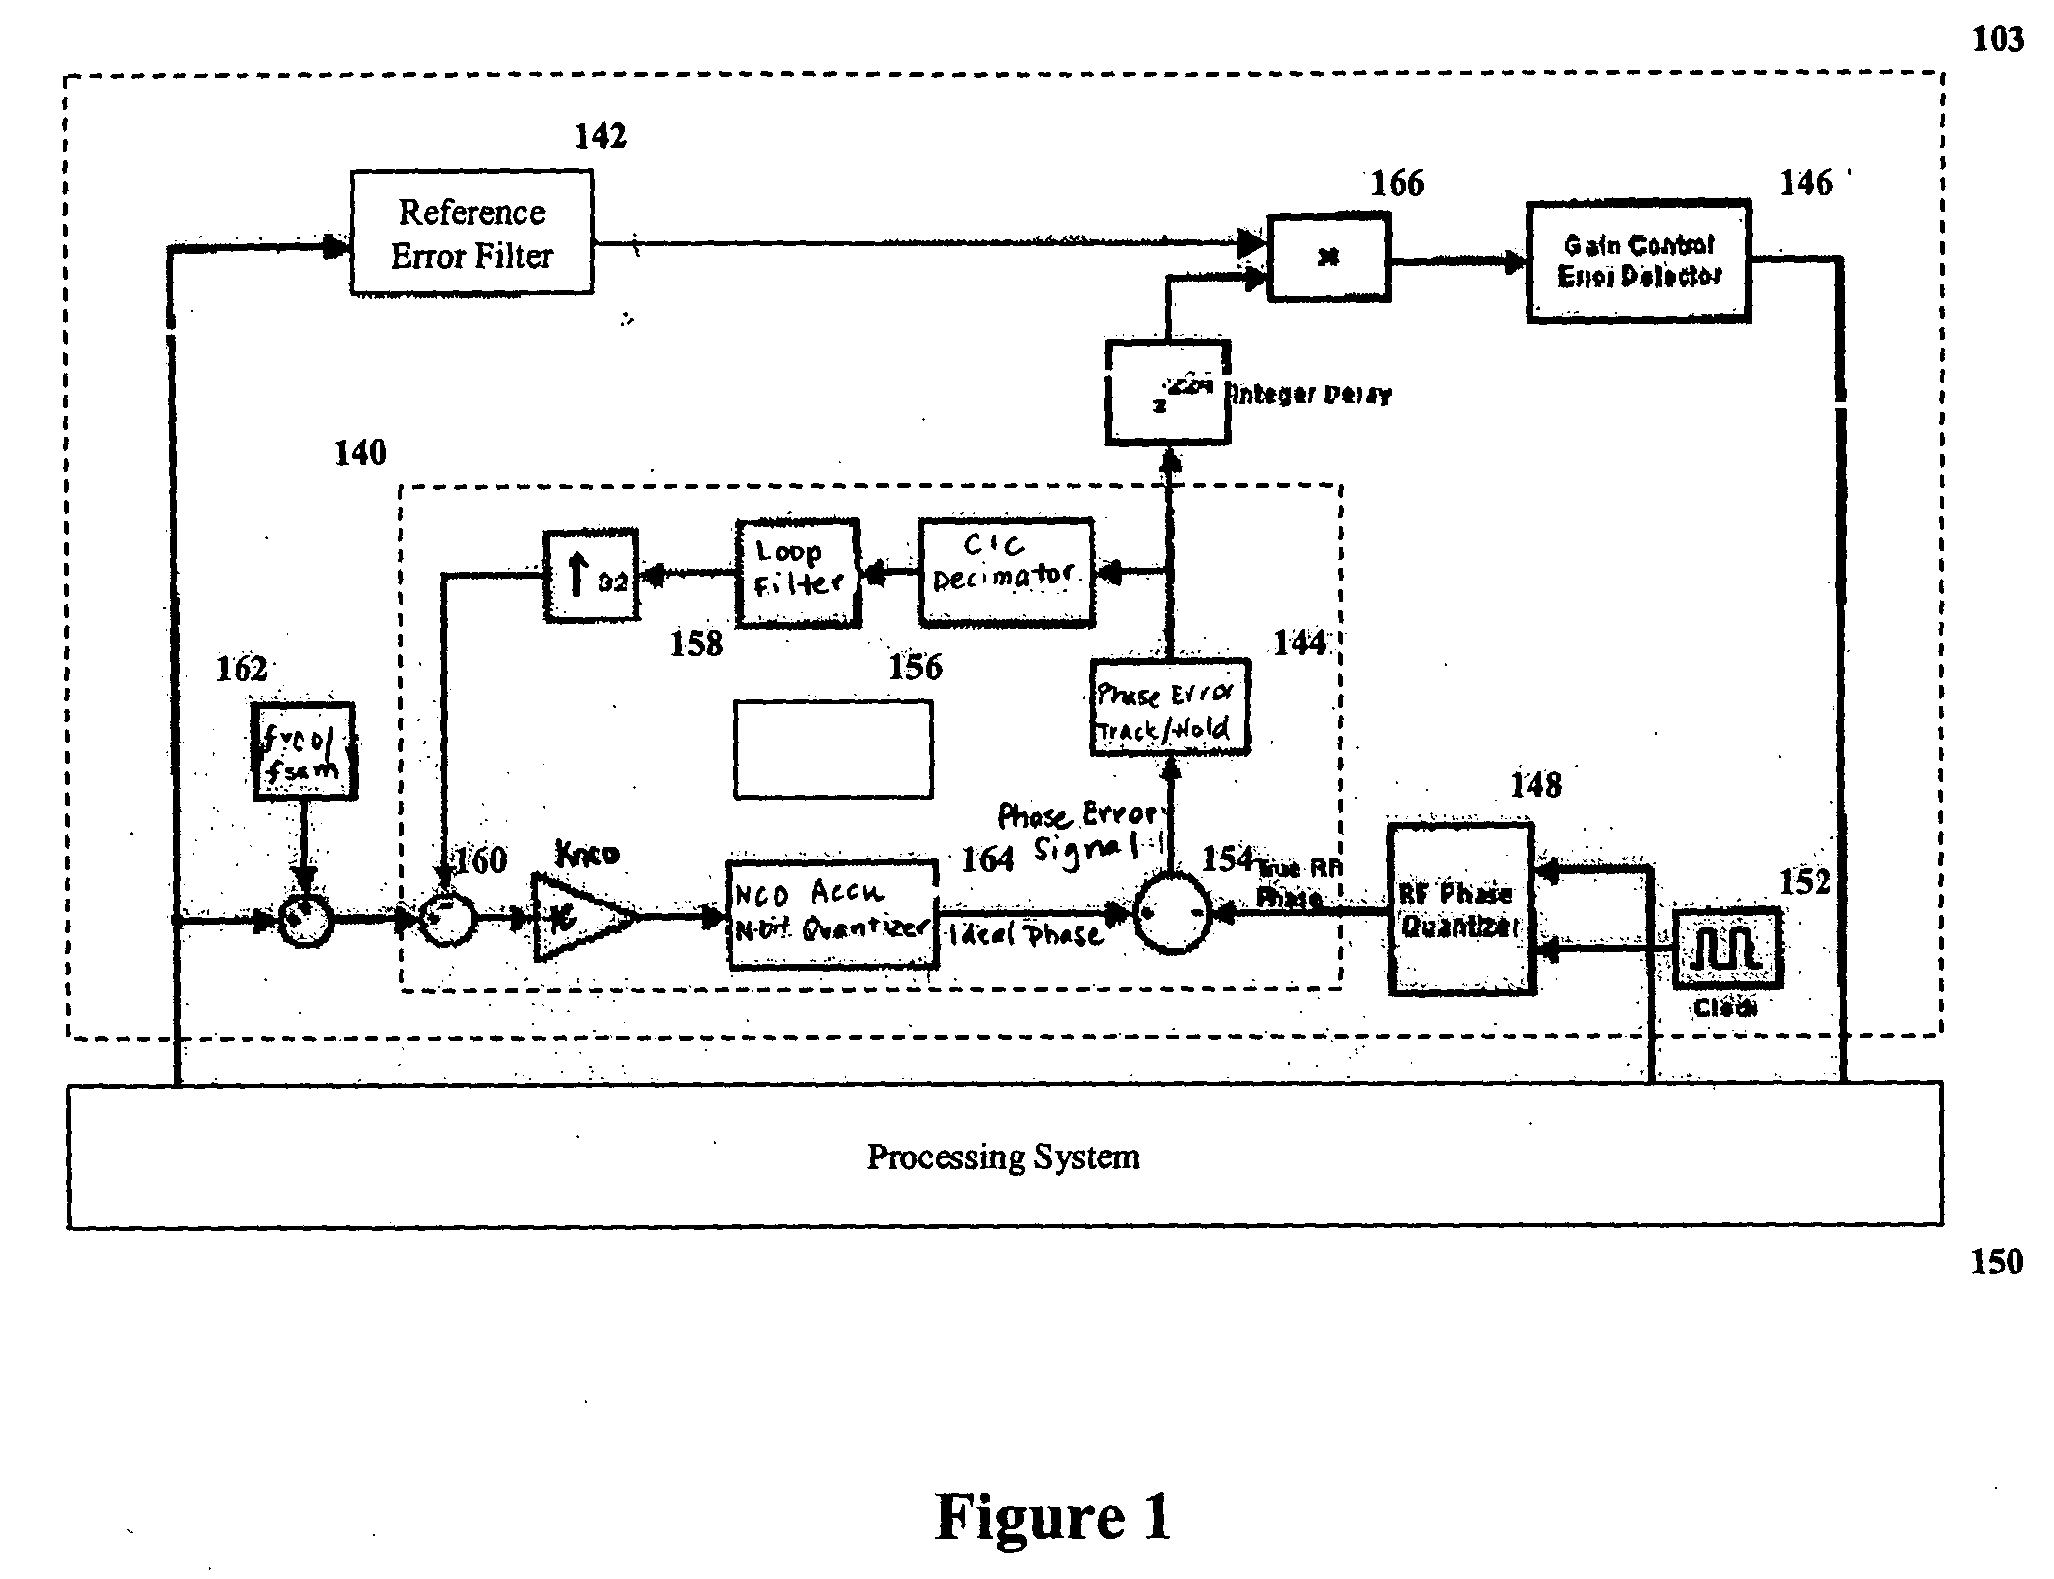 Apparatus, methods and articles of manufacture for signal correction using adaptive phase re-alignment